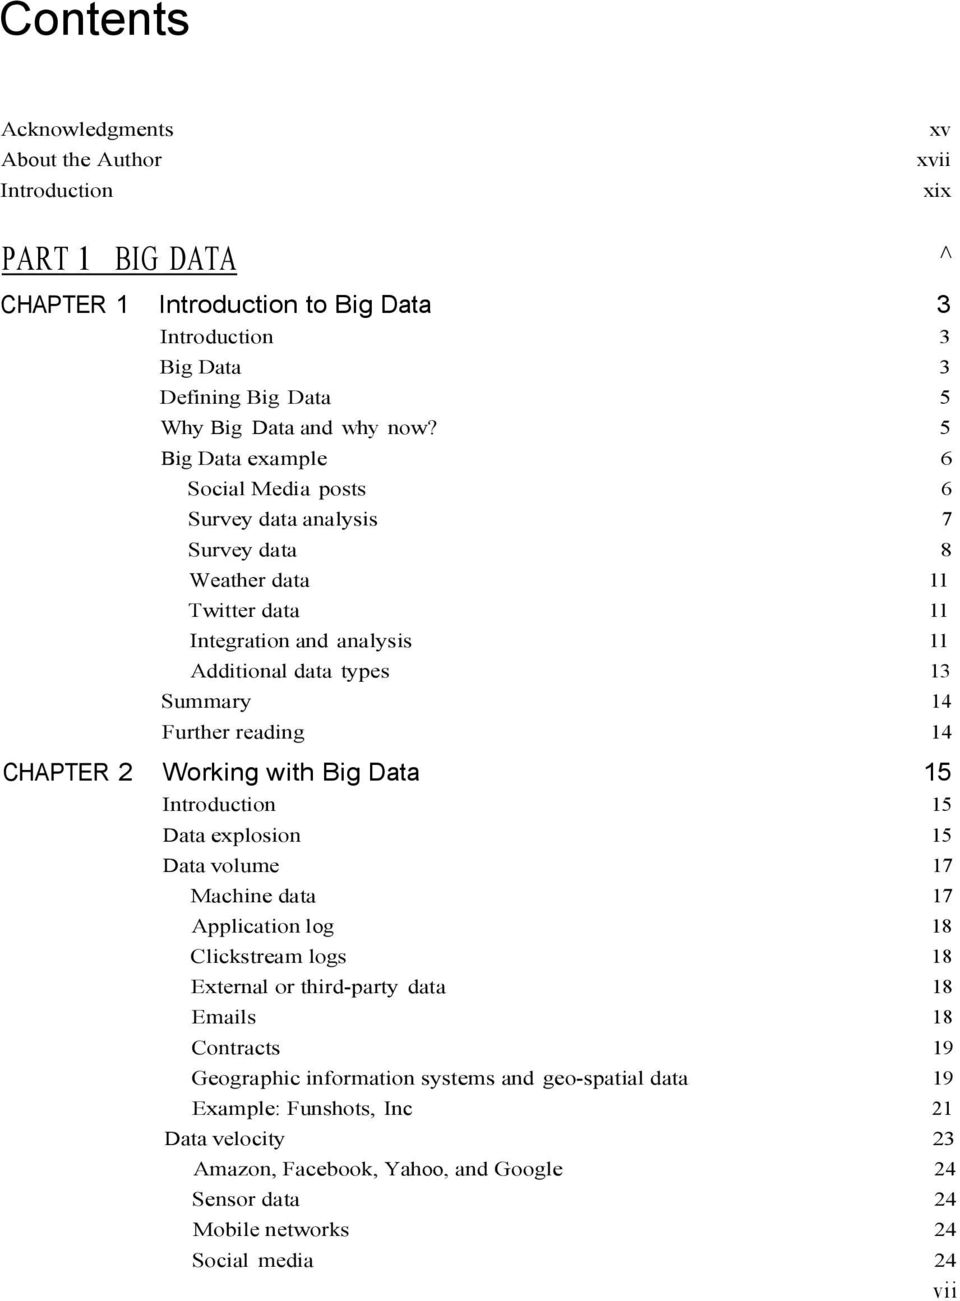 14 CHAPTER 2 Working with Big Data 15 Introduction 15 Data explosion 15 Data volume 17 Machine data 17 Application log 18 Clickstream logs 18 External or third-party data 18 Emails 18